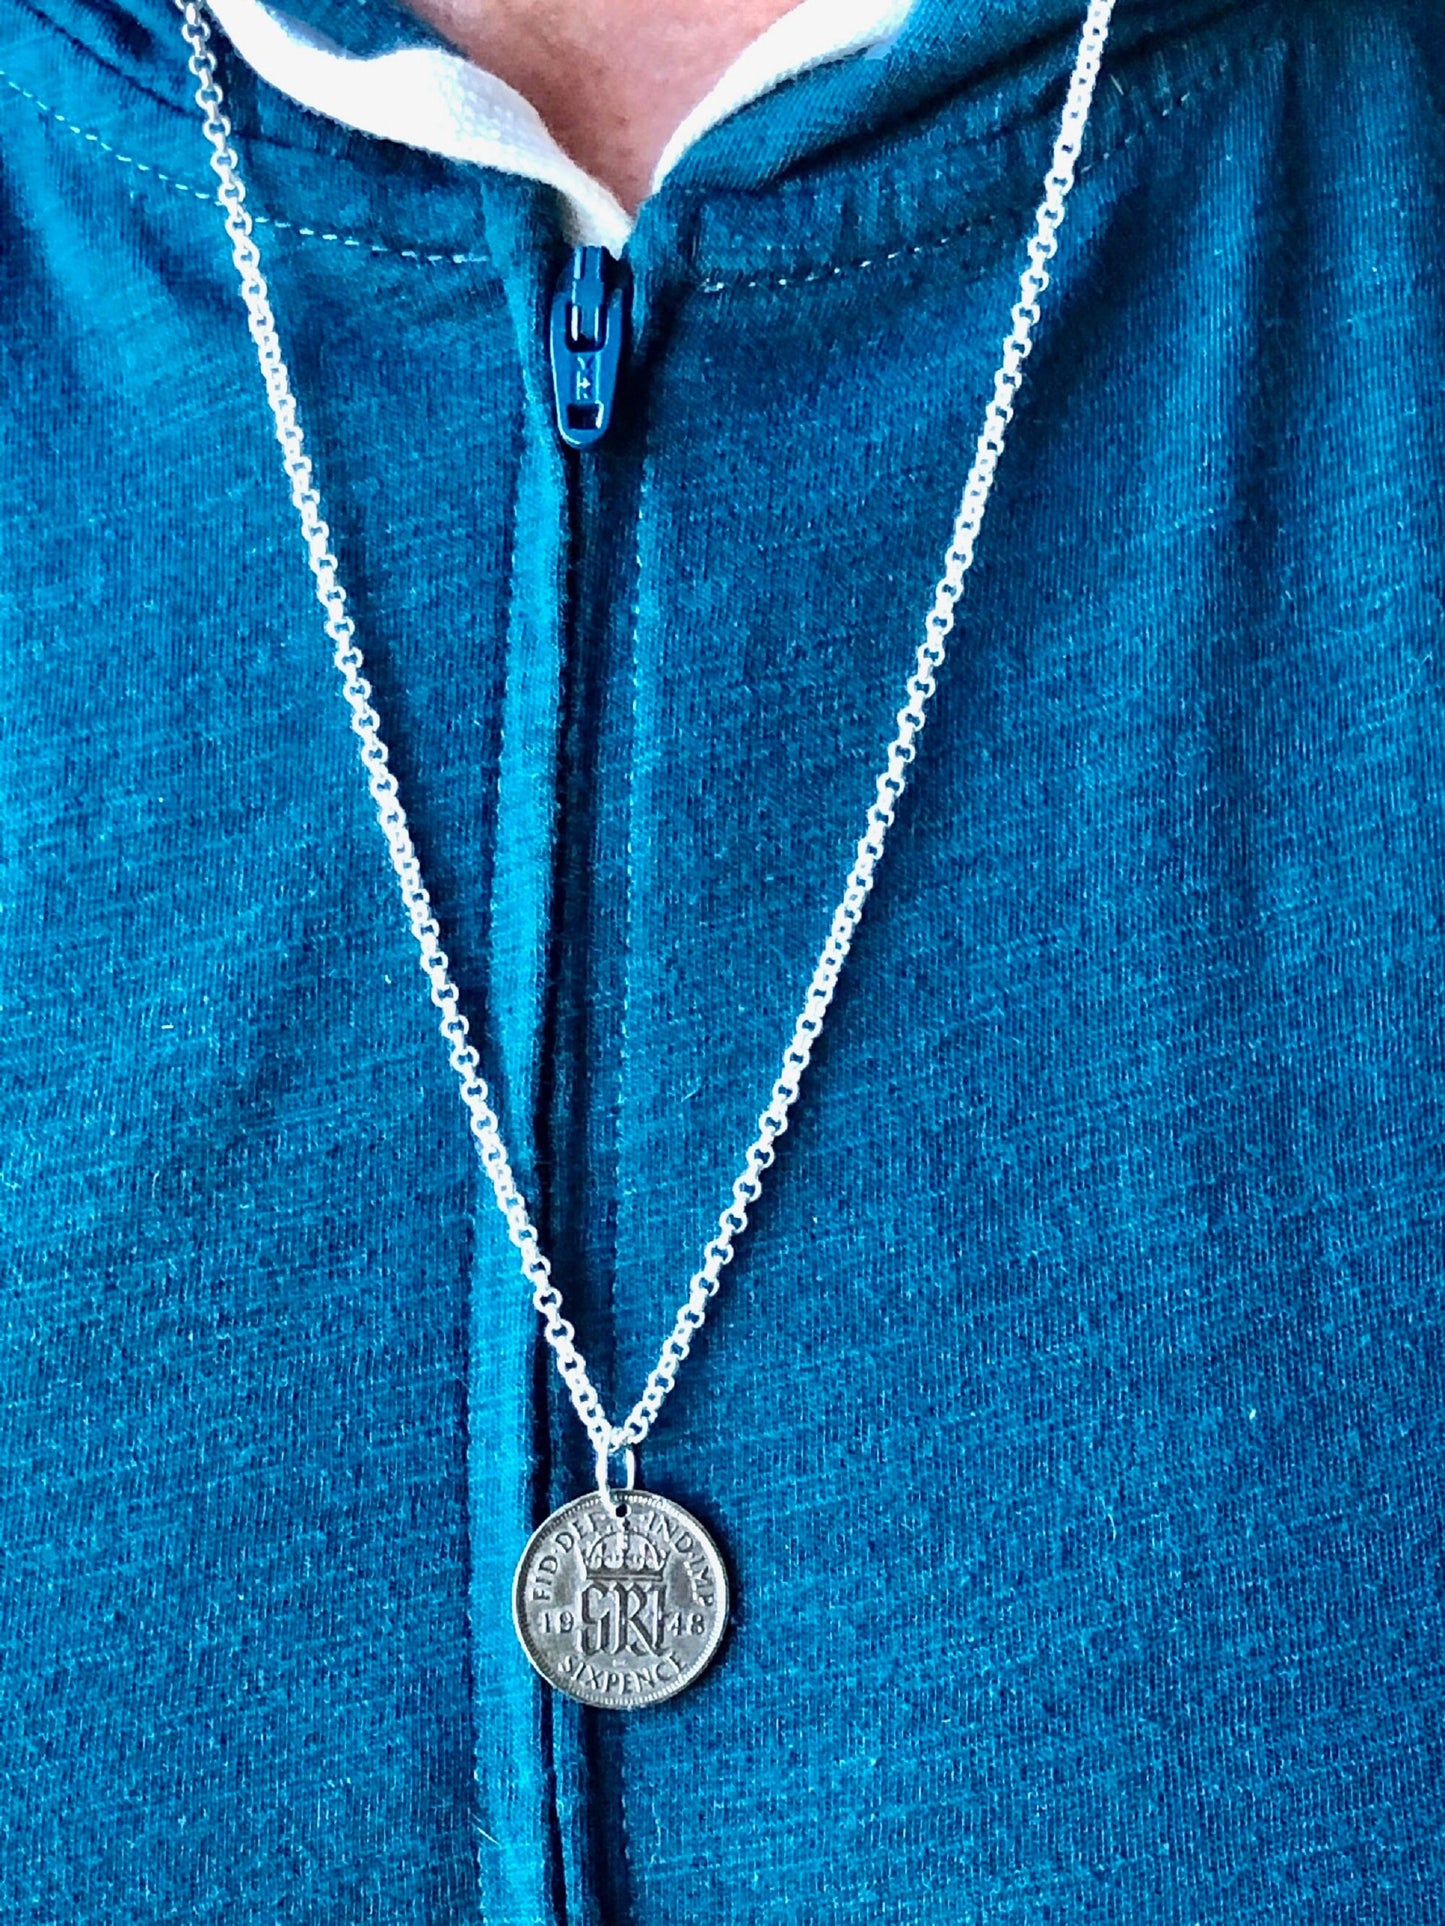 Britain Pendant Coin Necklace 6 Pence Sixpence United Kingdom Personal Jewelry Gift Friend Charm For Him Her World Coin Collector